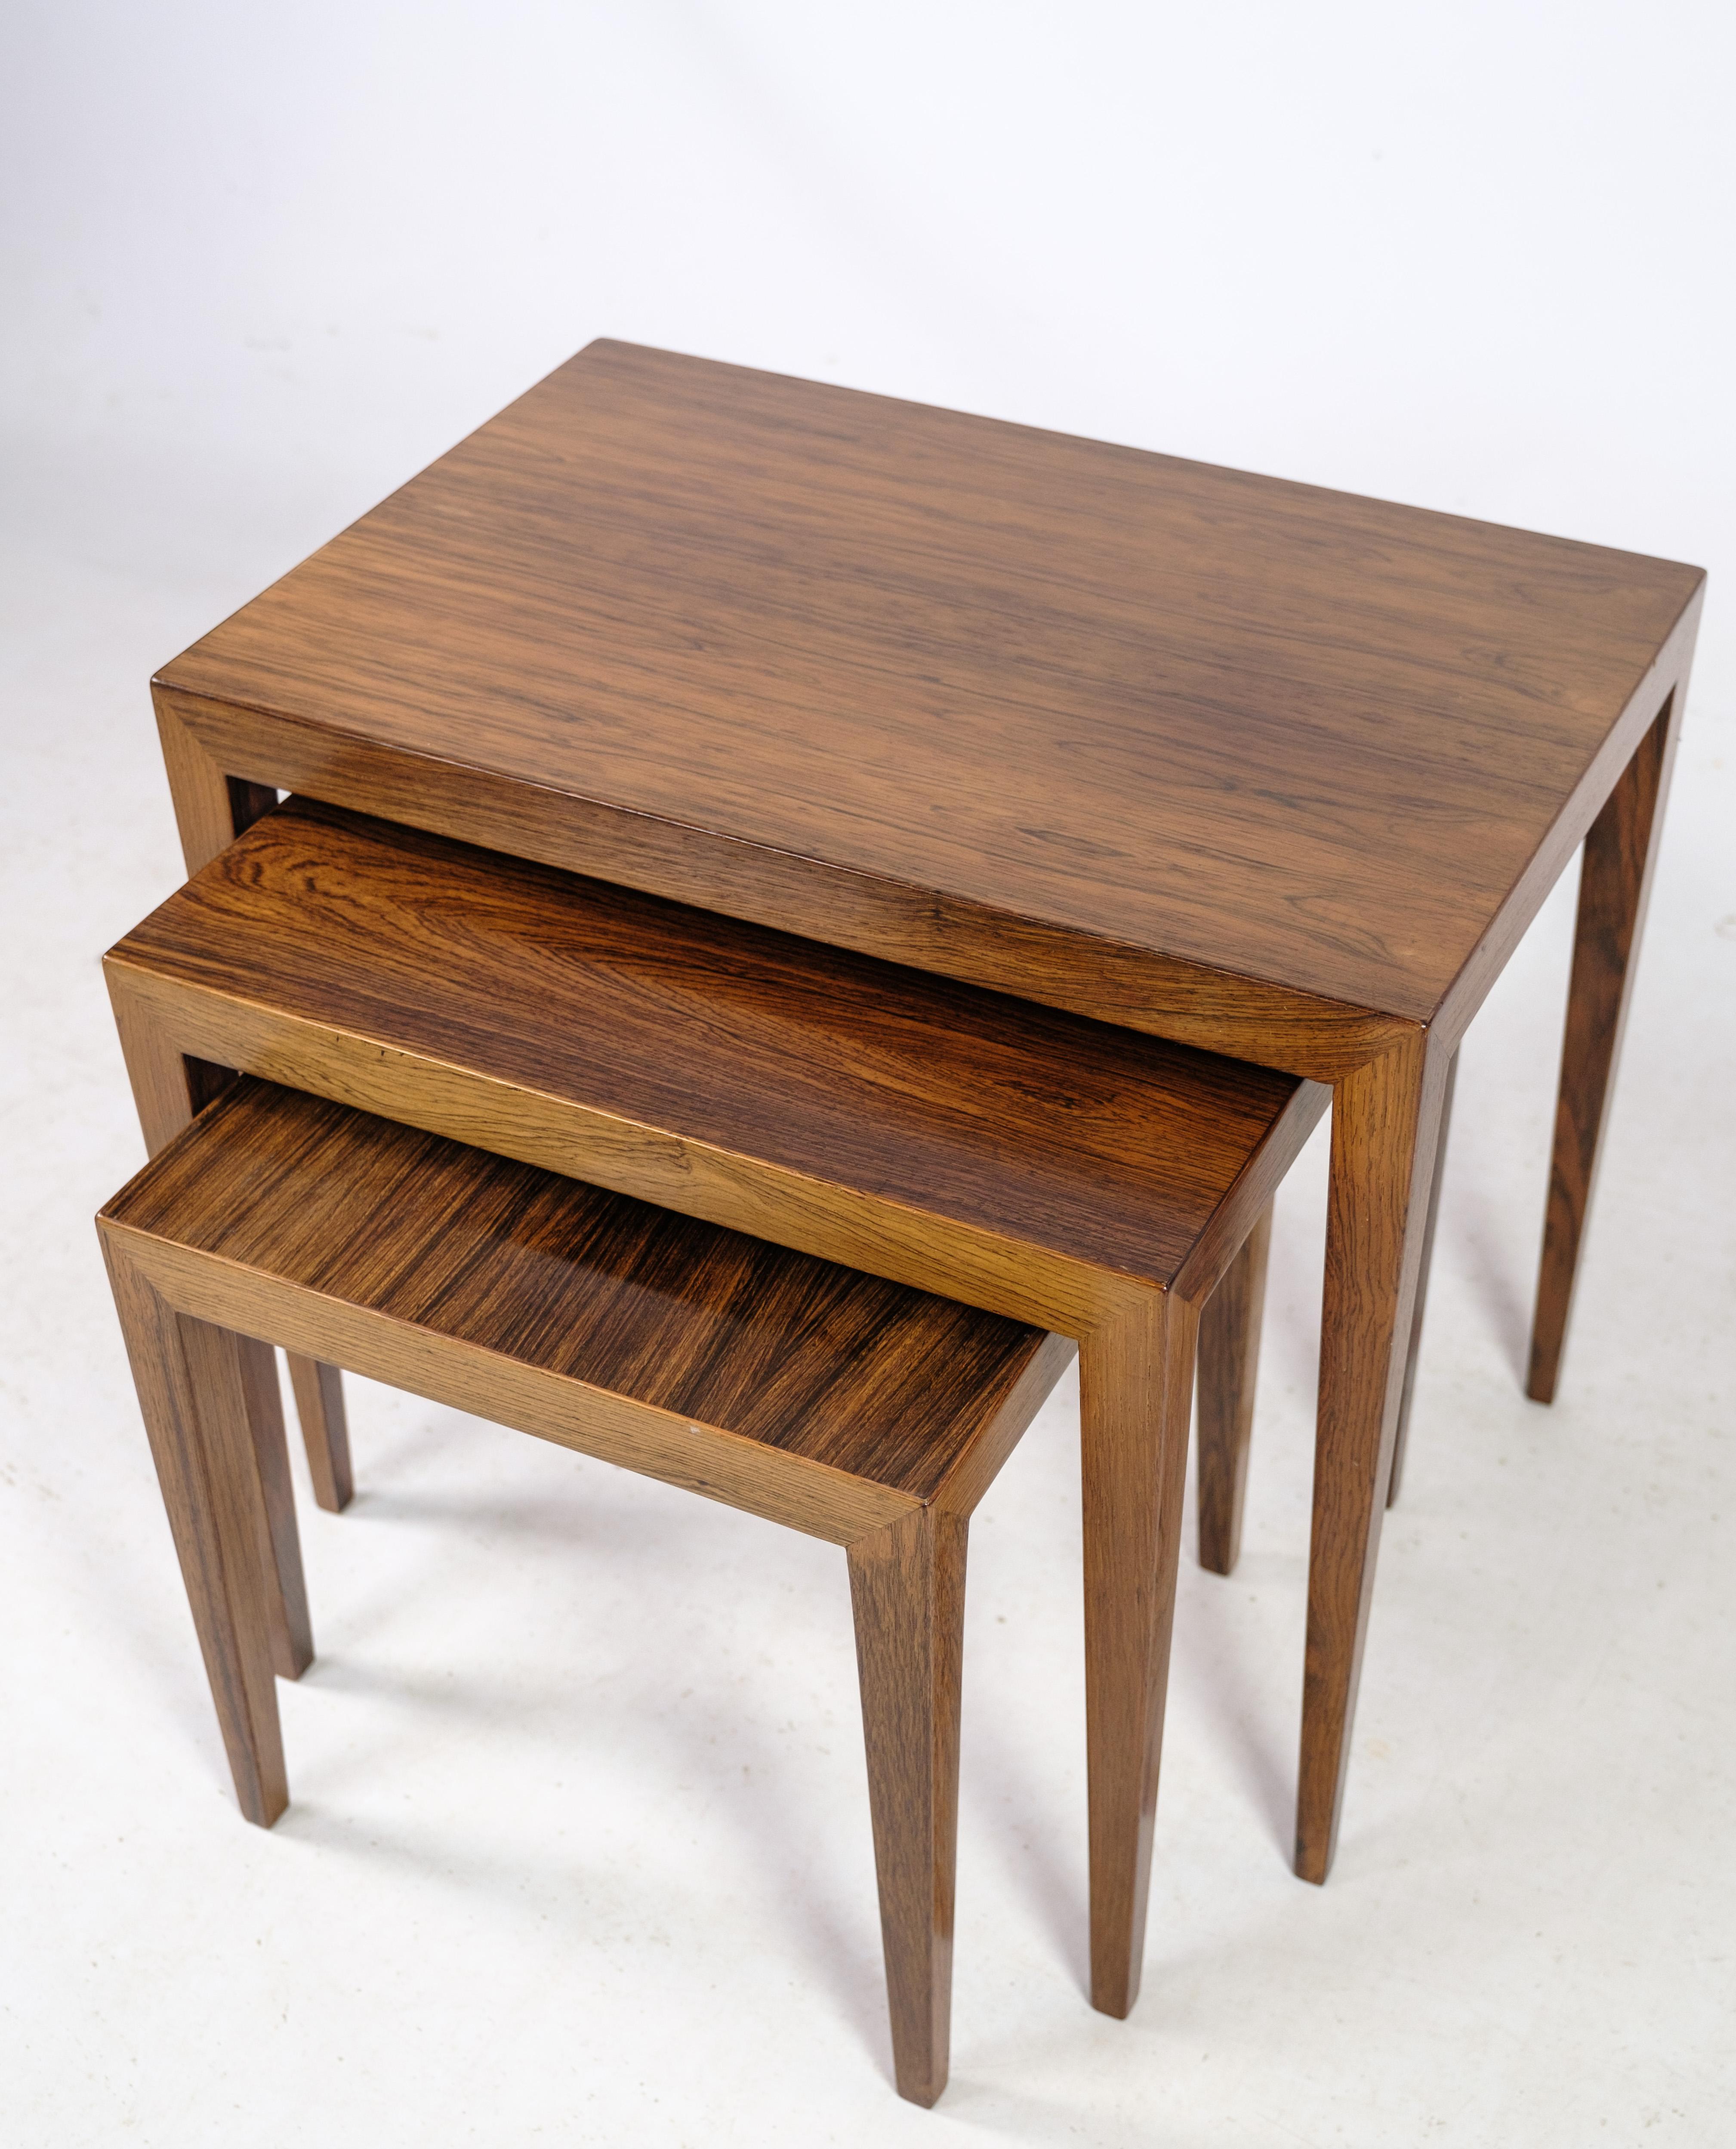 These nesting tables, designed by Severin Hansen and crafted from rosewood, offer a timeless blend of elegance and functionality. Manufactured at Haslev Møbelfabrik around the 1960s, these tables bear the prestigious Danish design stamp, a mark of